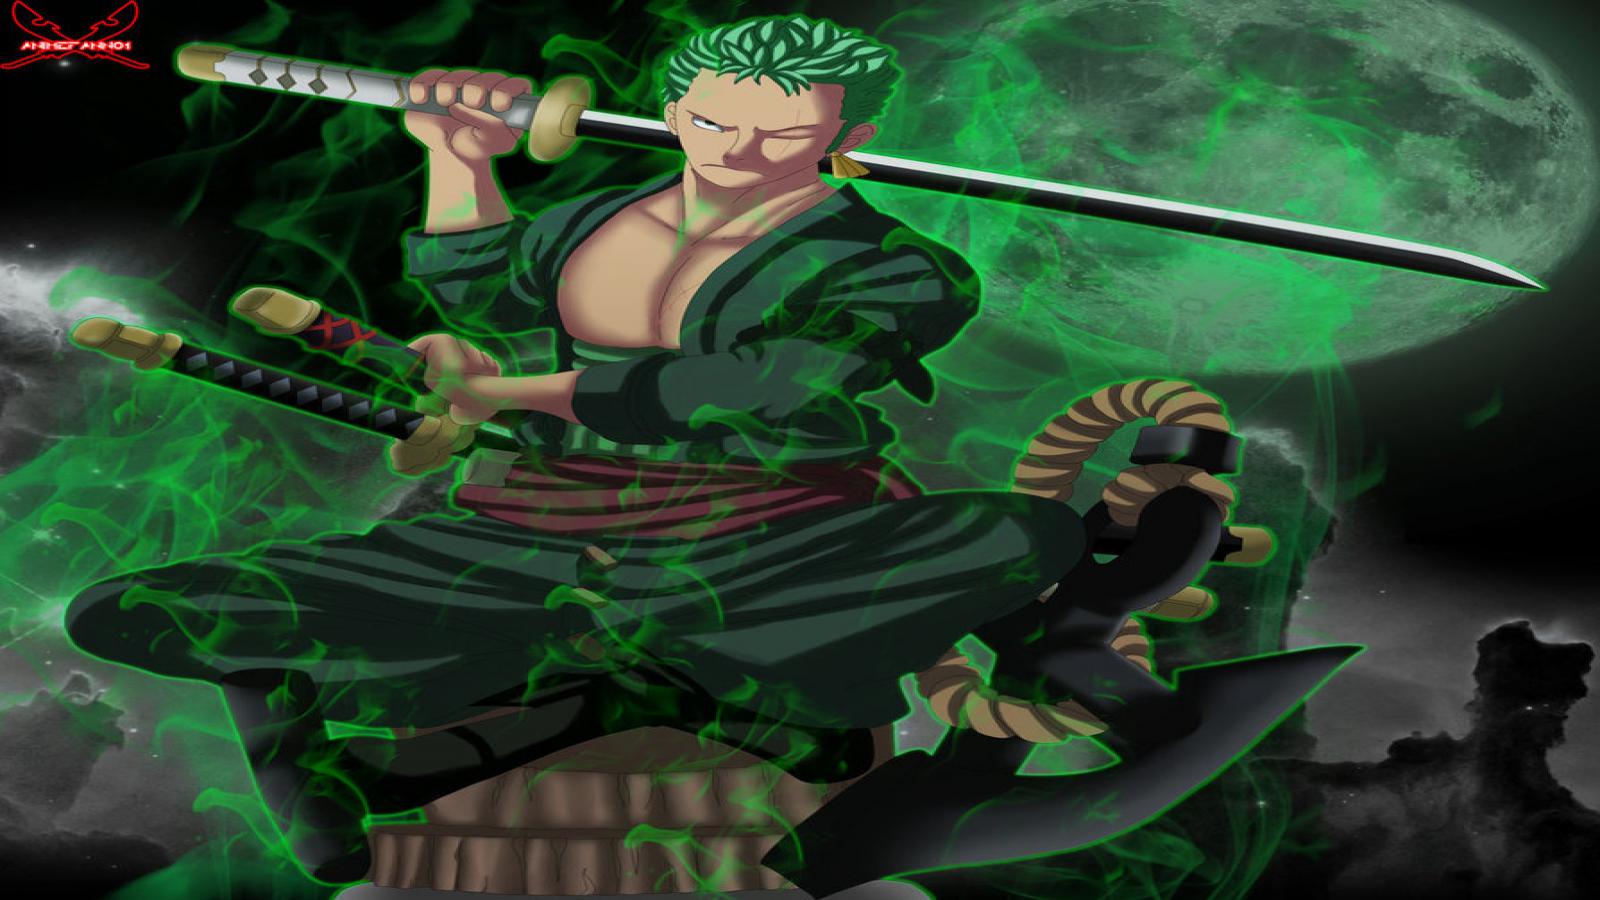 The green swordsman from the east blue